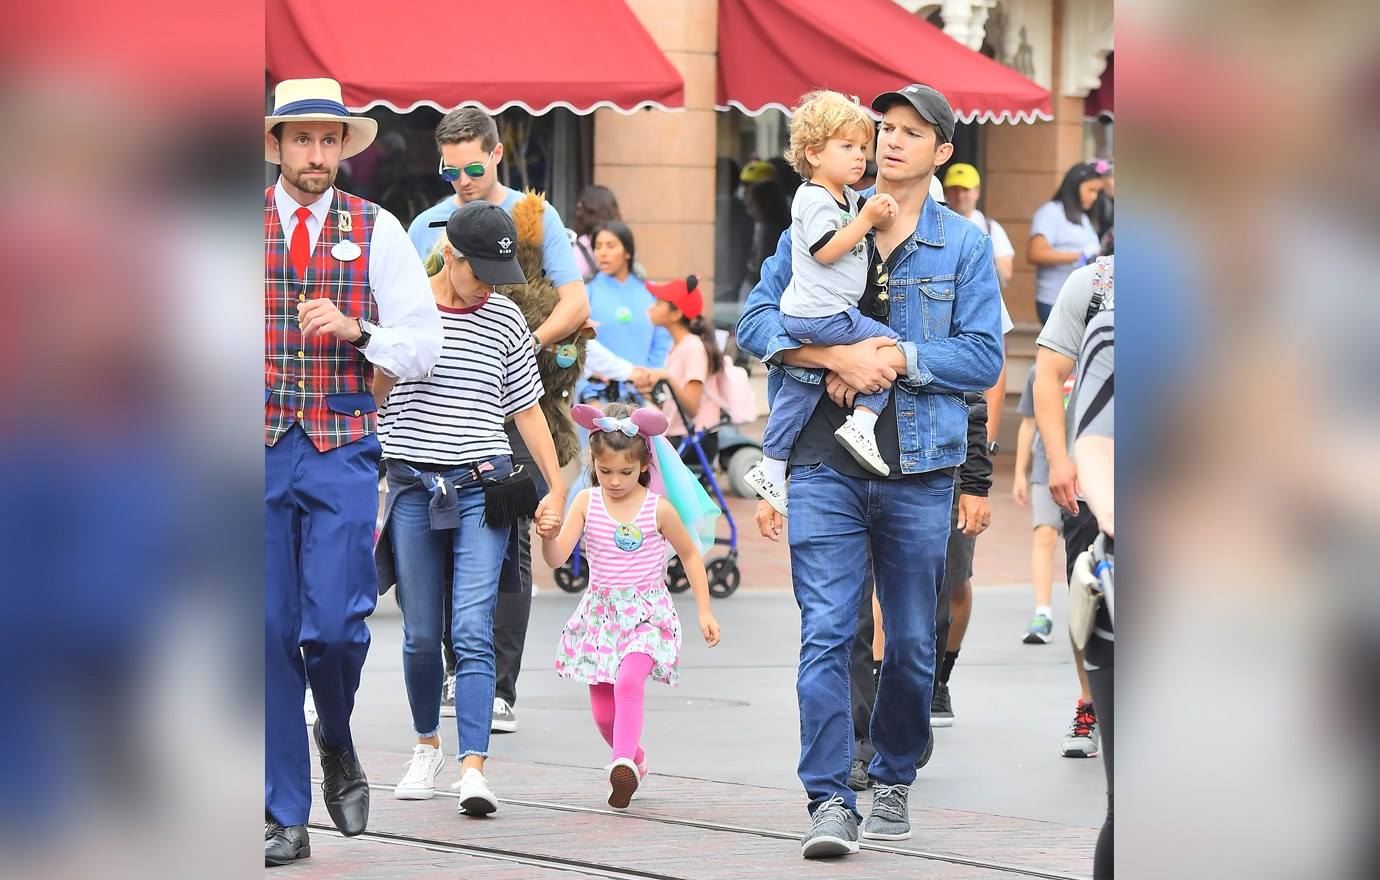 EXCLUSIVE: Ashton Kutcher and Mila Kunis celebrate their daughter's birthday at the happiest place on earth, Disneyland